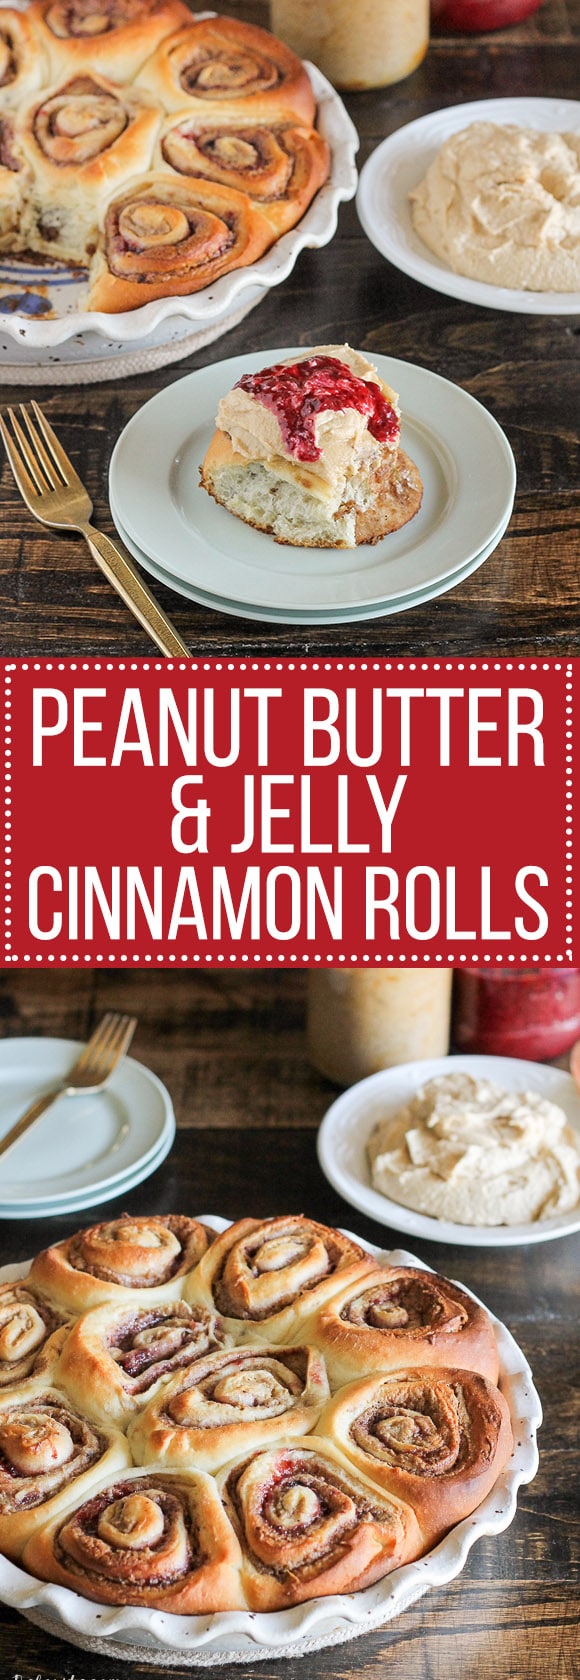 These Peanut Butter & Jelly Cinnamon Rolls are a delicious twist on a classic breakfast treat. These cinnamon rolls are filled with peanut butter and jelly and topped with a peanut butter cream cheese frosting. This will be the best PB&J you've ever had!